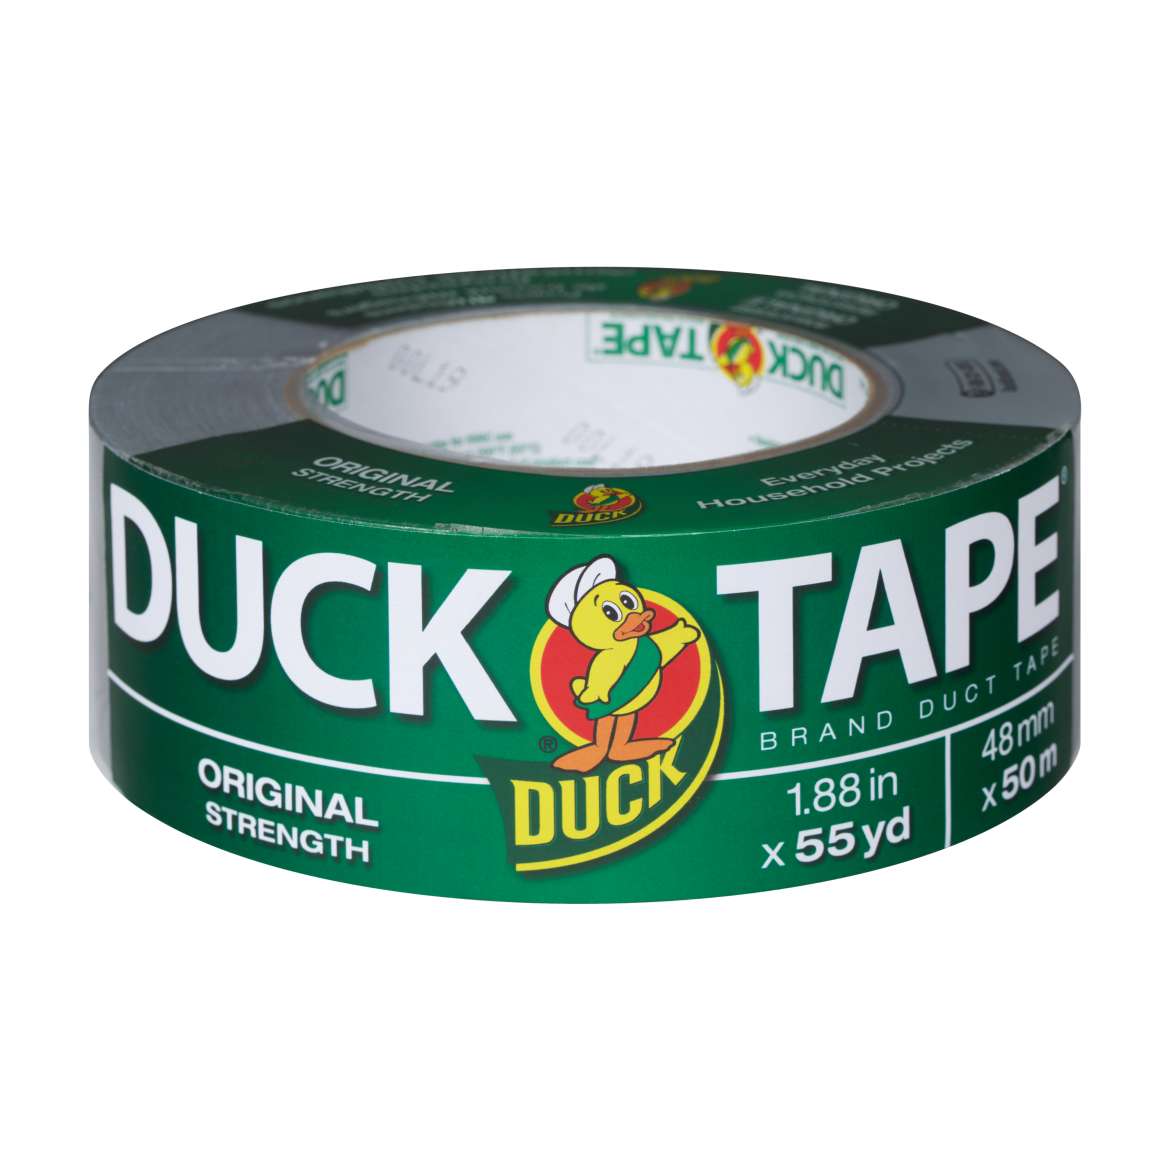 Duck Brand Original Strength Duct Tape, 1.88 in. x 55 yds., Silver - image 1 of 9